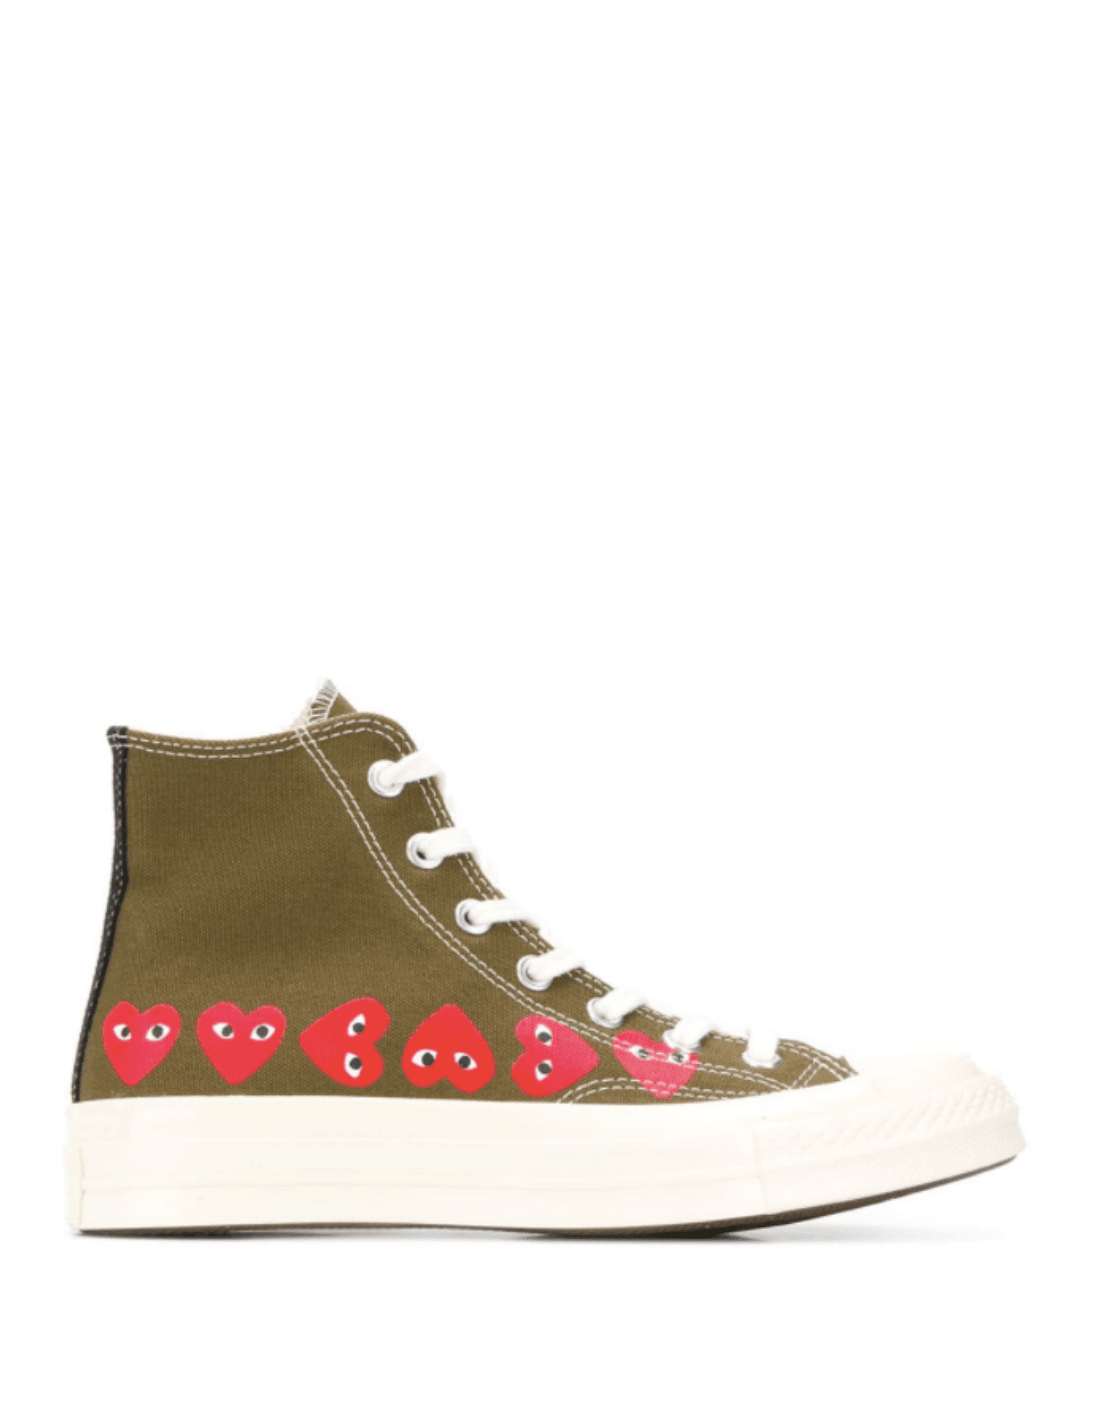 High-top multi-heart sneakers in kaki canvas from the COMME DES GARÇONS PLAY x CONVERSE